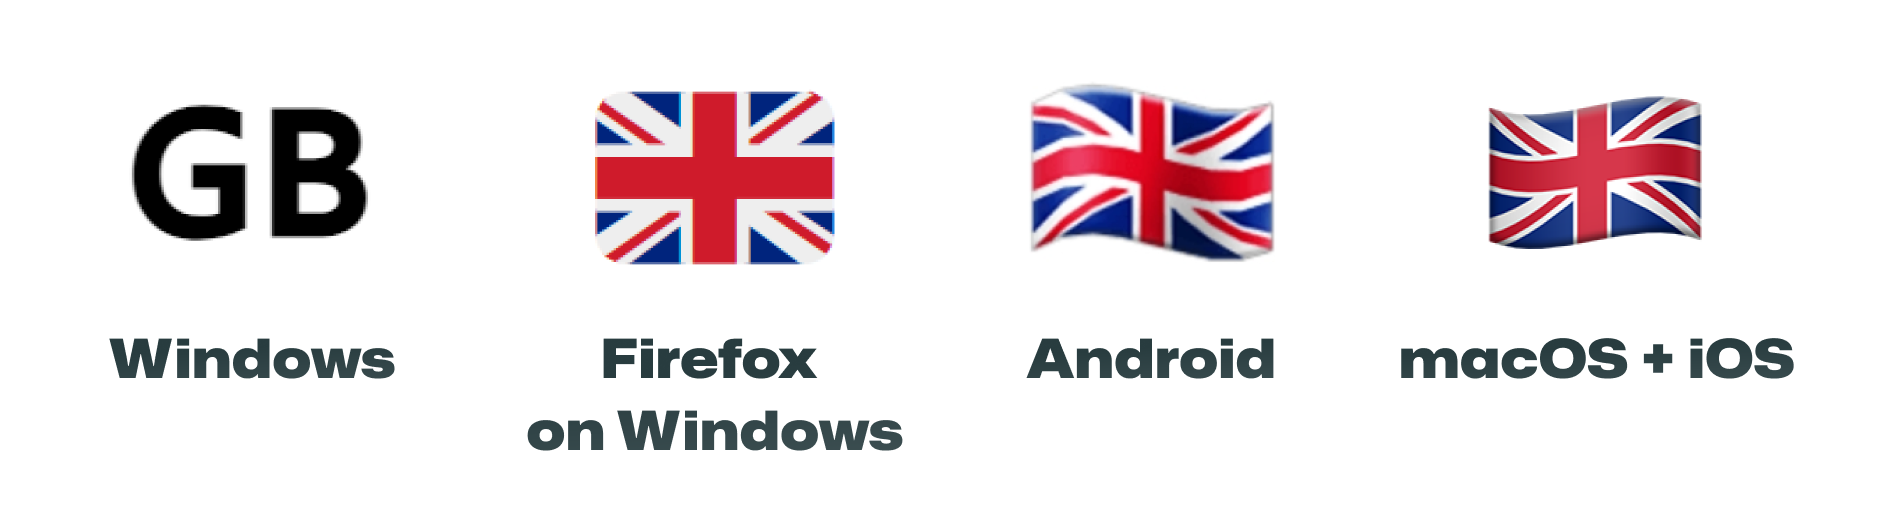 Screenshots of the UK flag on different operating systems